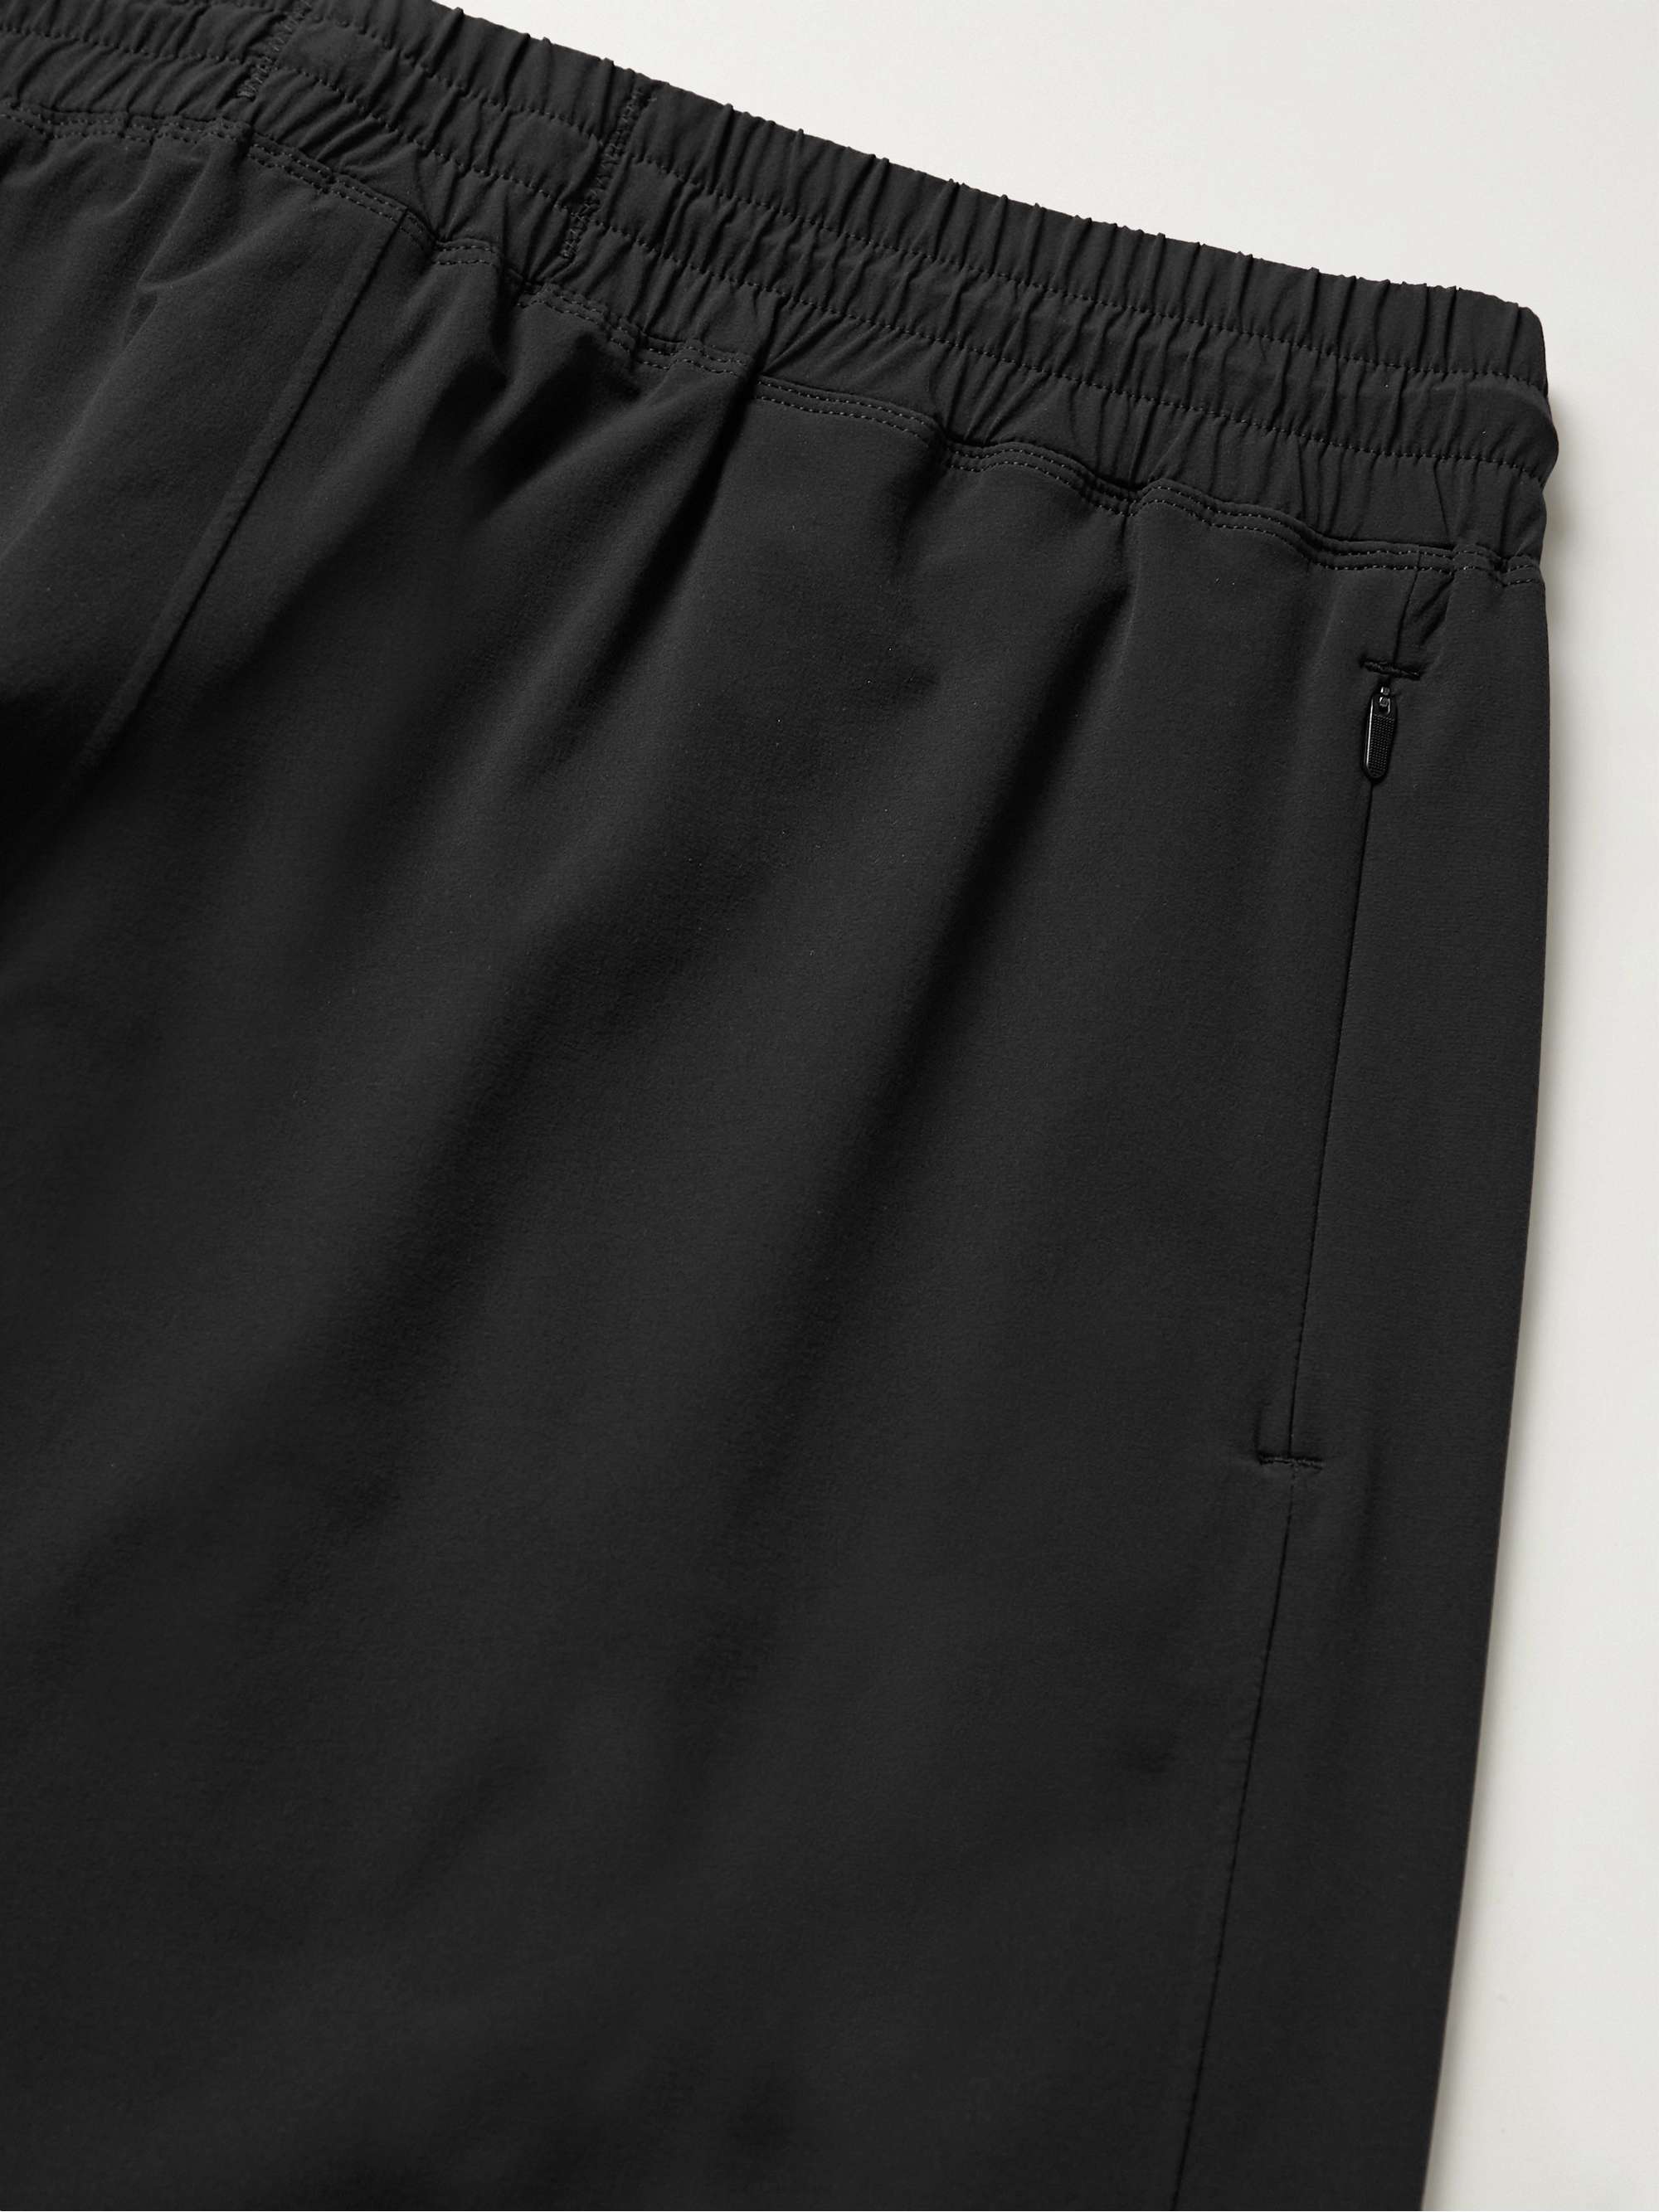 REIGNING CHAMP Tapered Stretch-Nylon Sweatpants